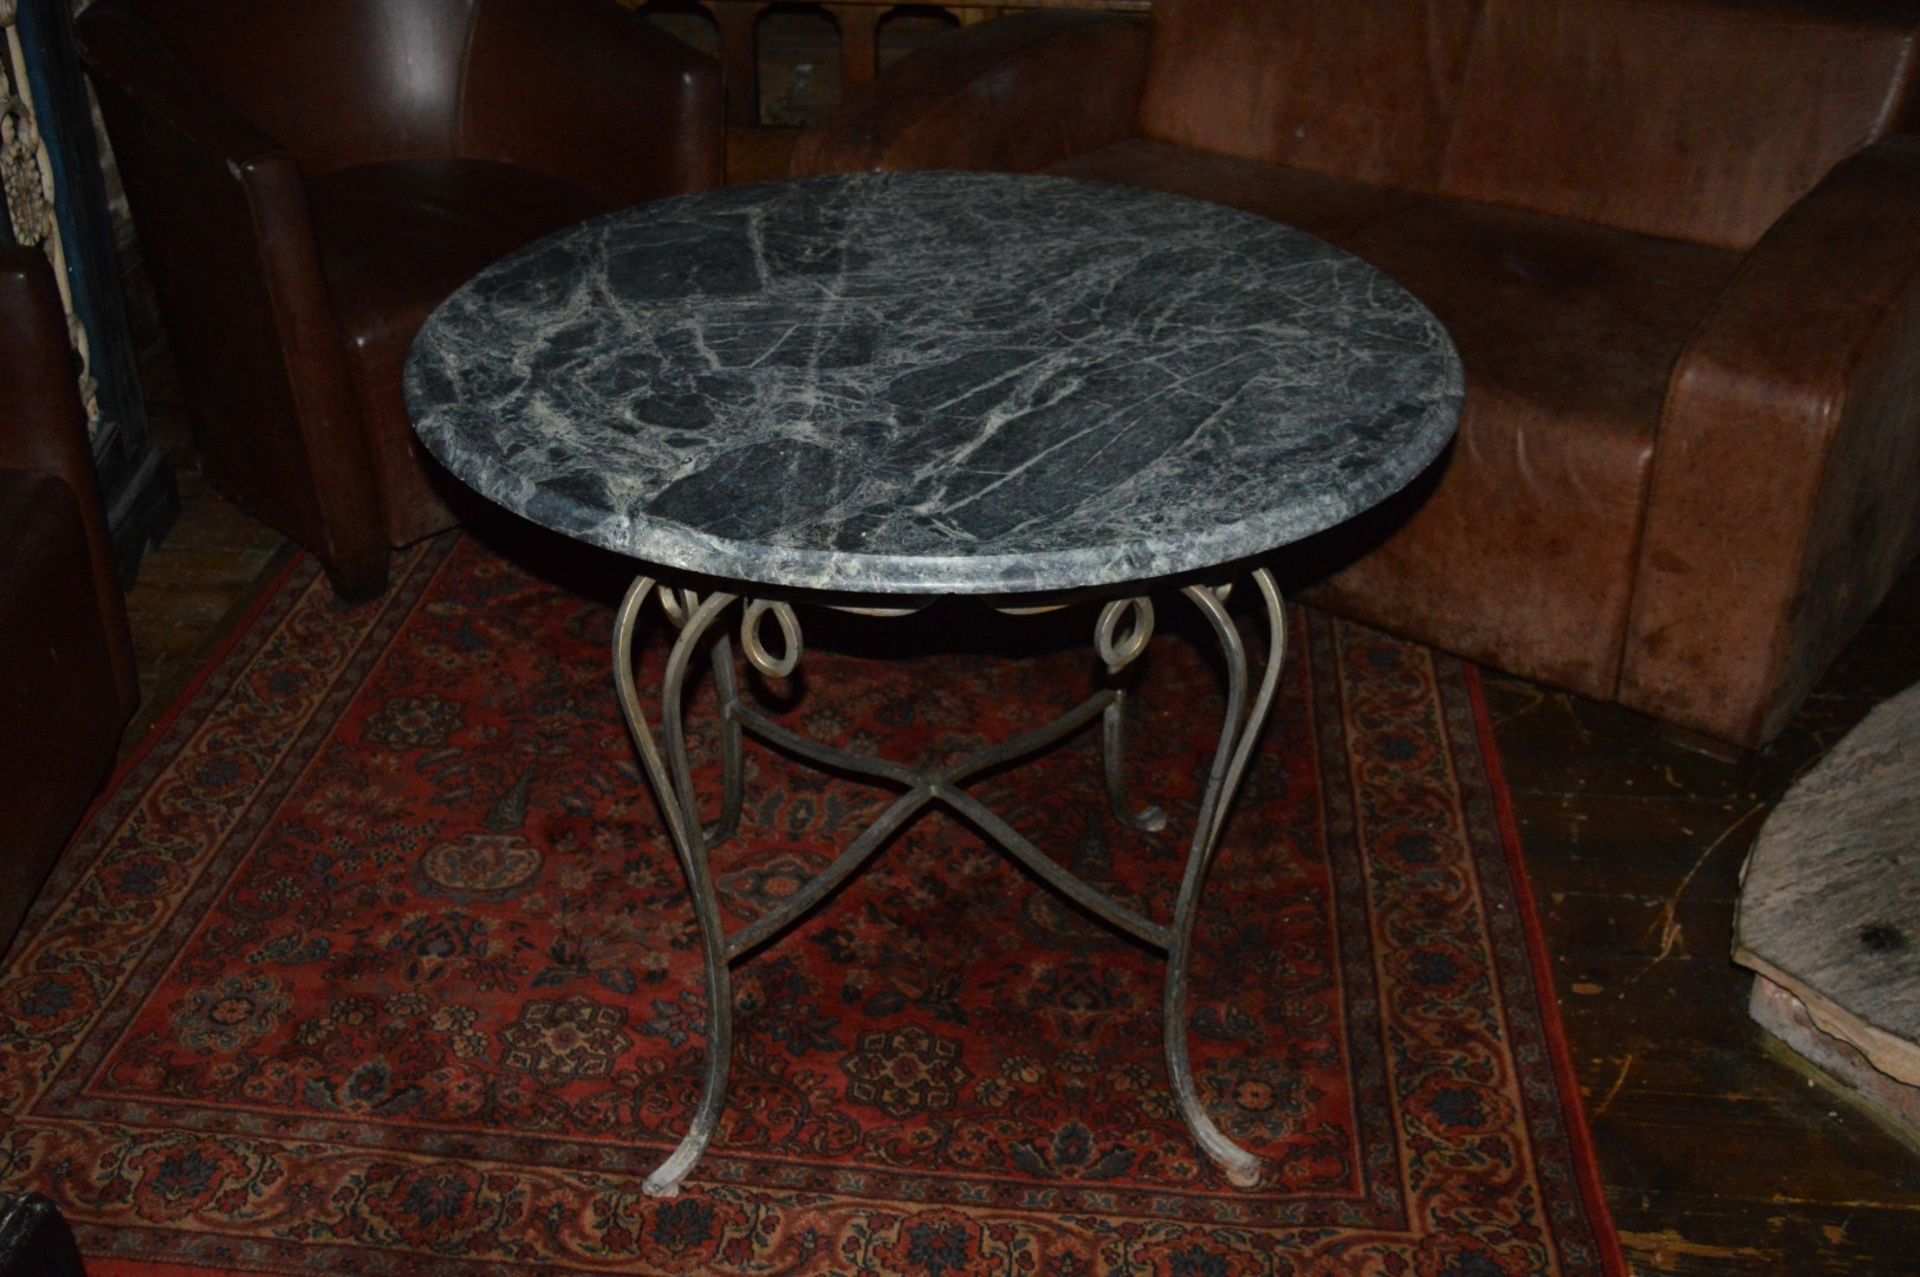 1 x Exquisite Dining Table - Green Stone Marbel Effect Top With Wrought Iron Base - See Images -